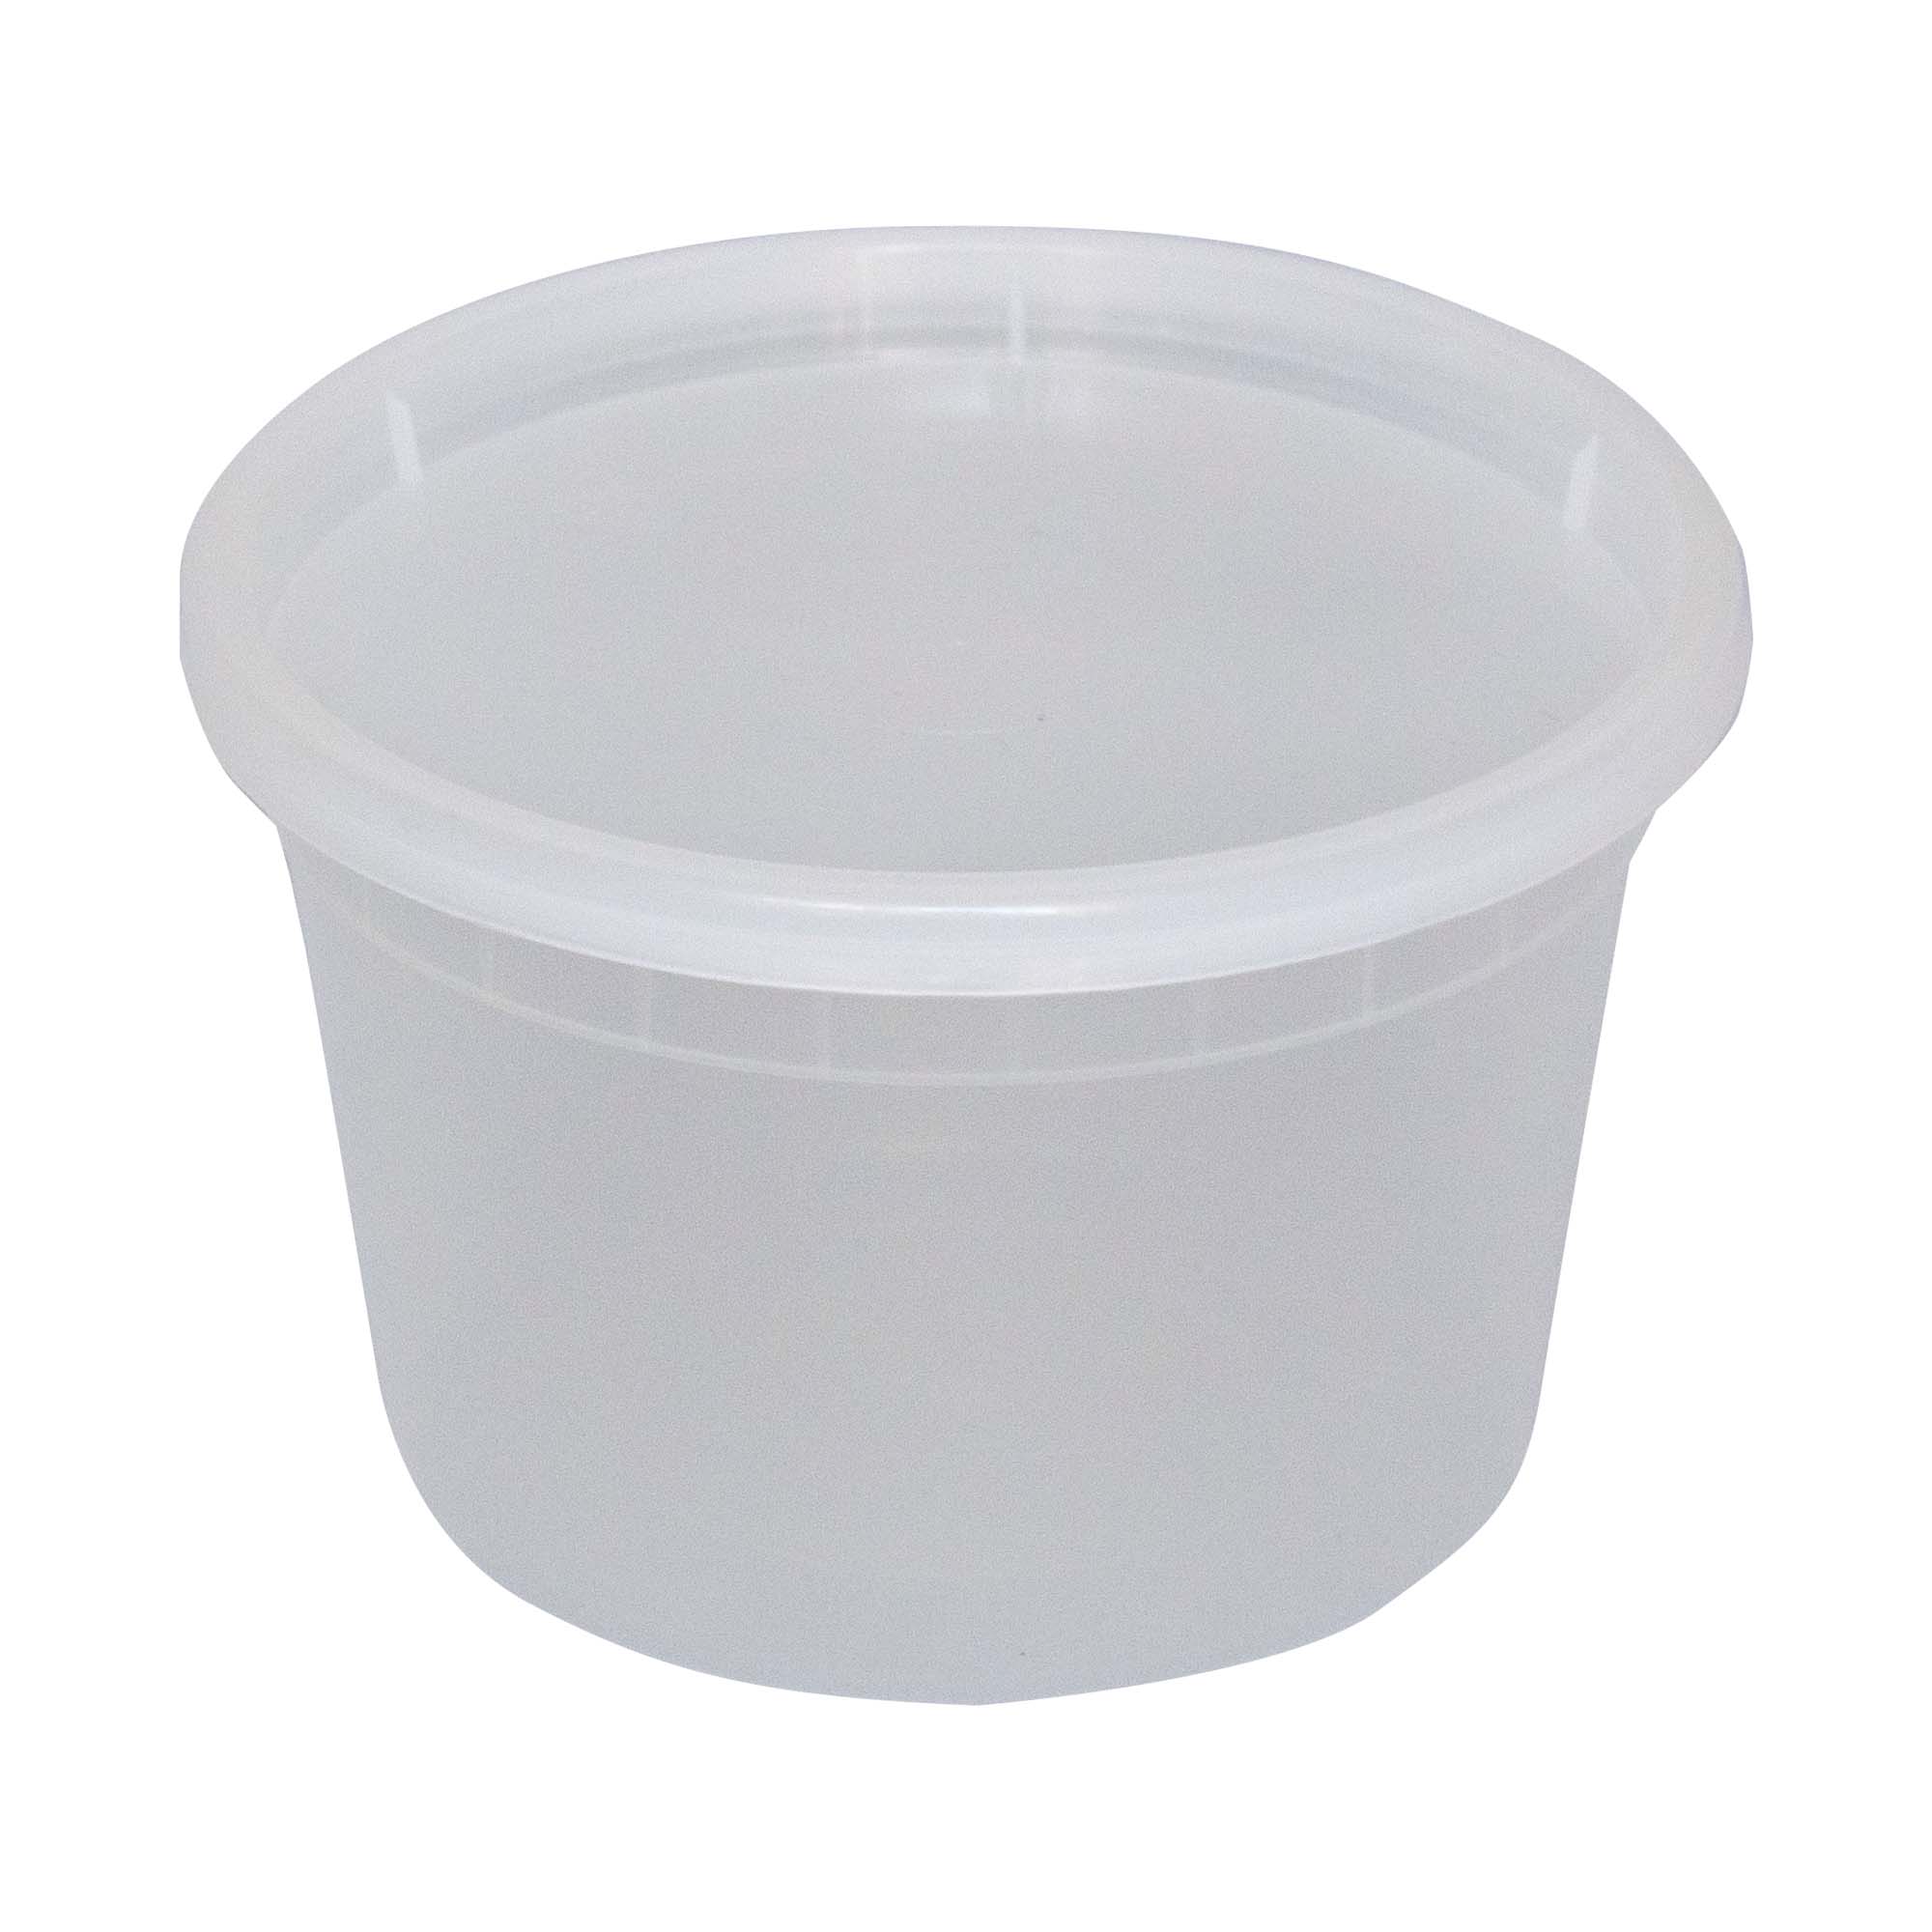 9 Freezer Containers for Soup You Need ASAP  Freezer containers for soup,  Freezer containers, Glass food storage containers